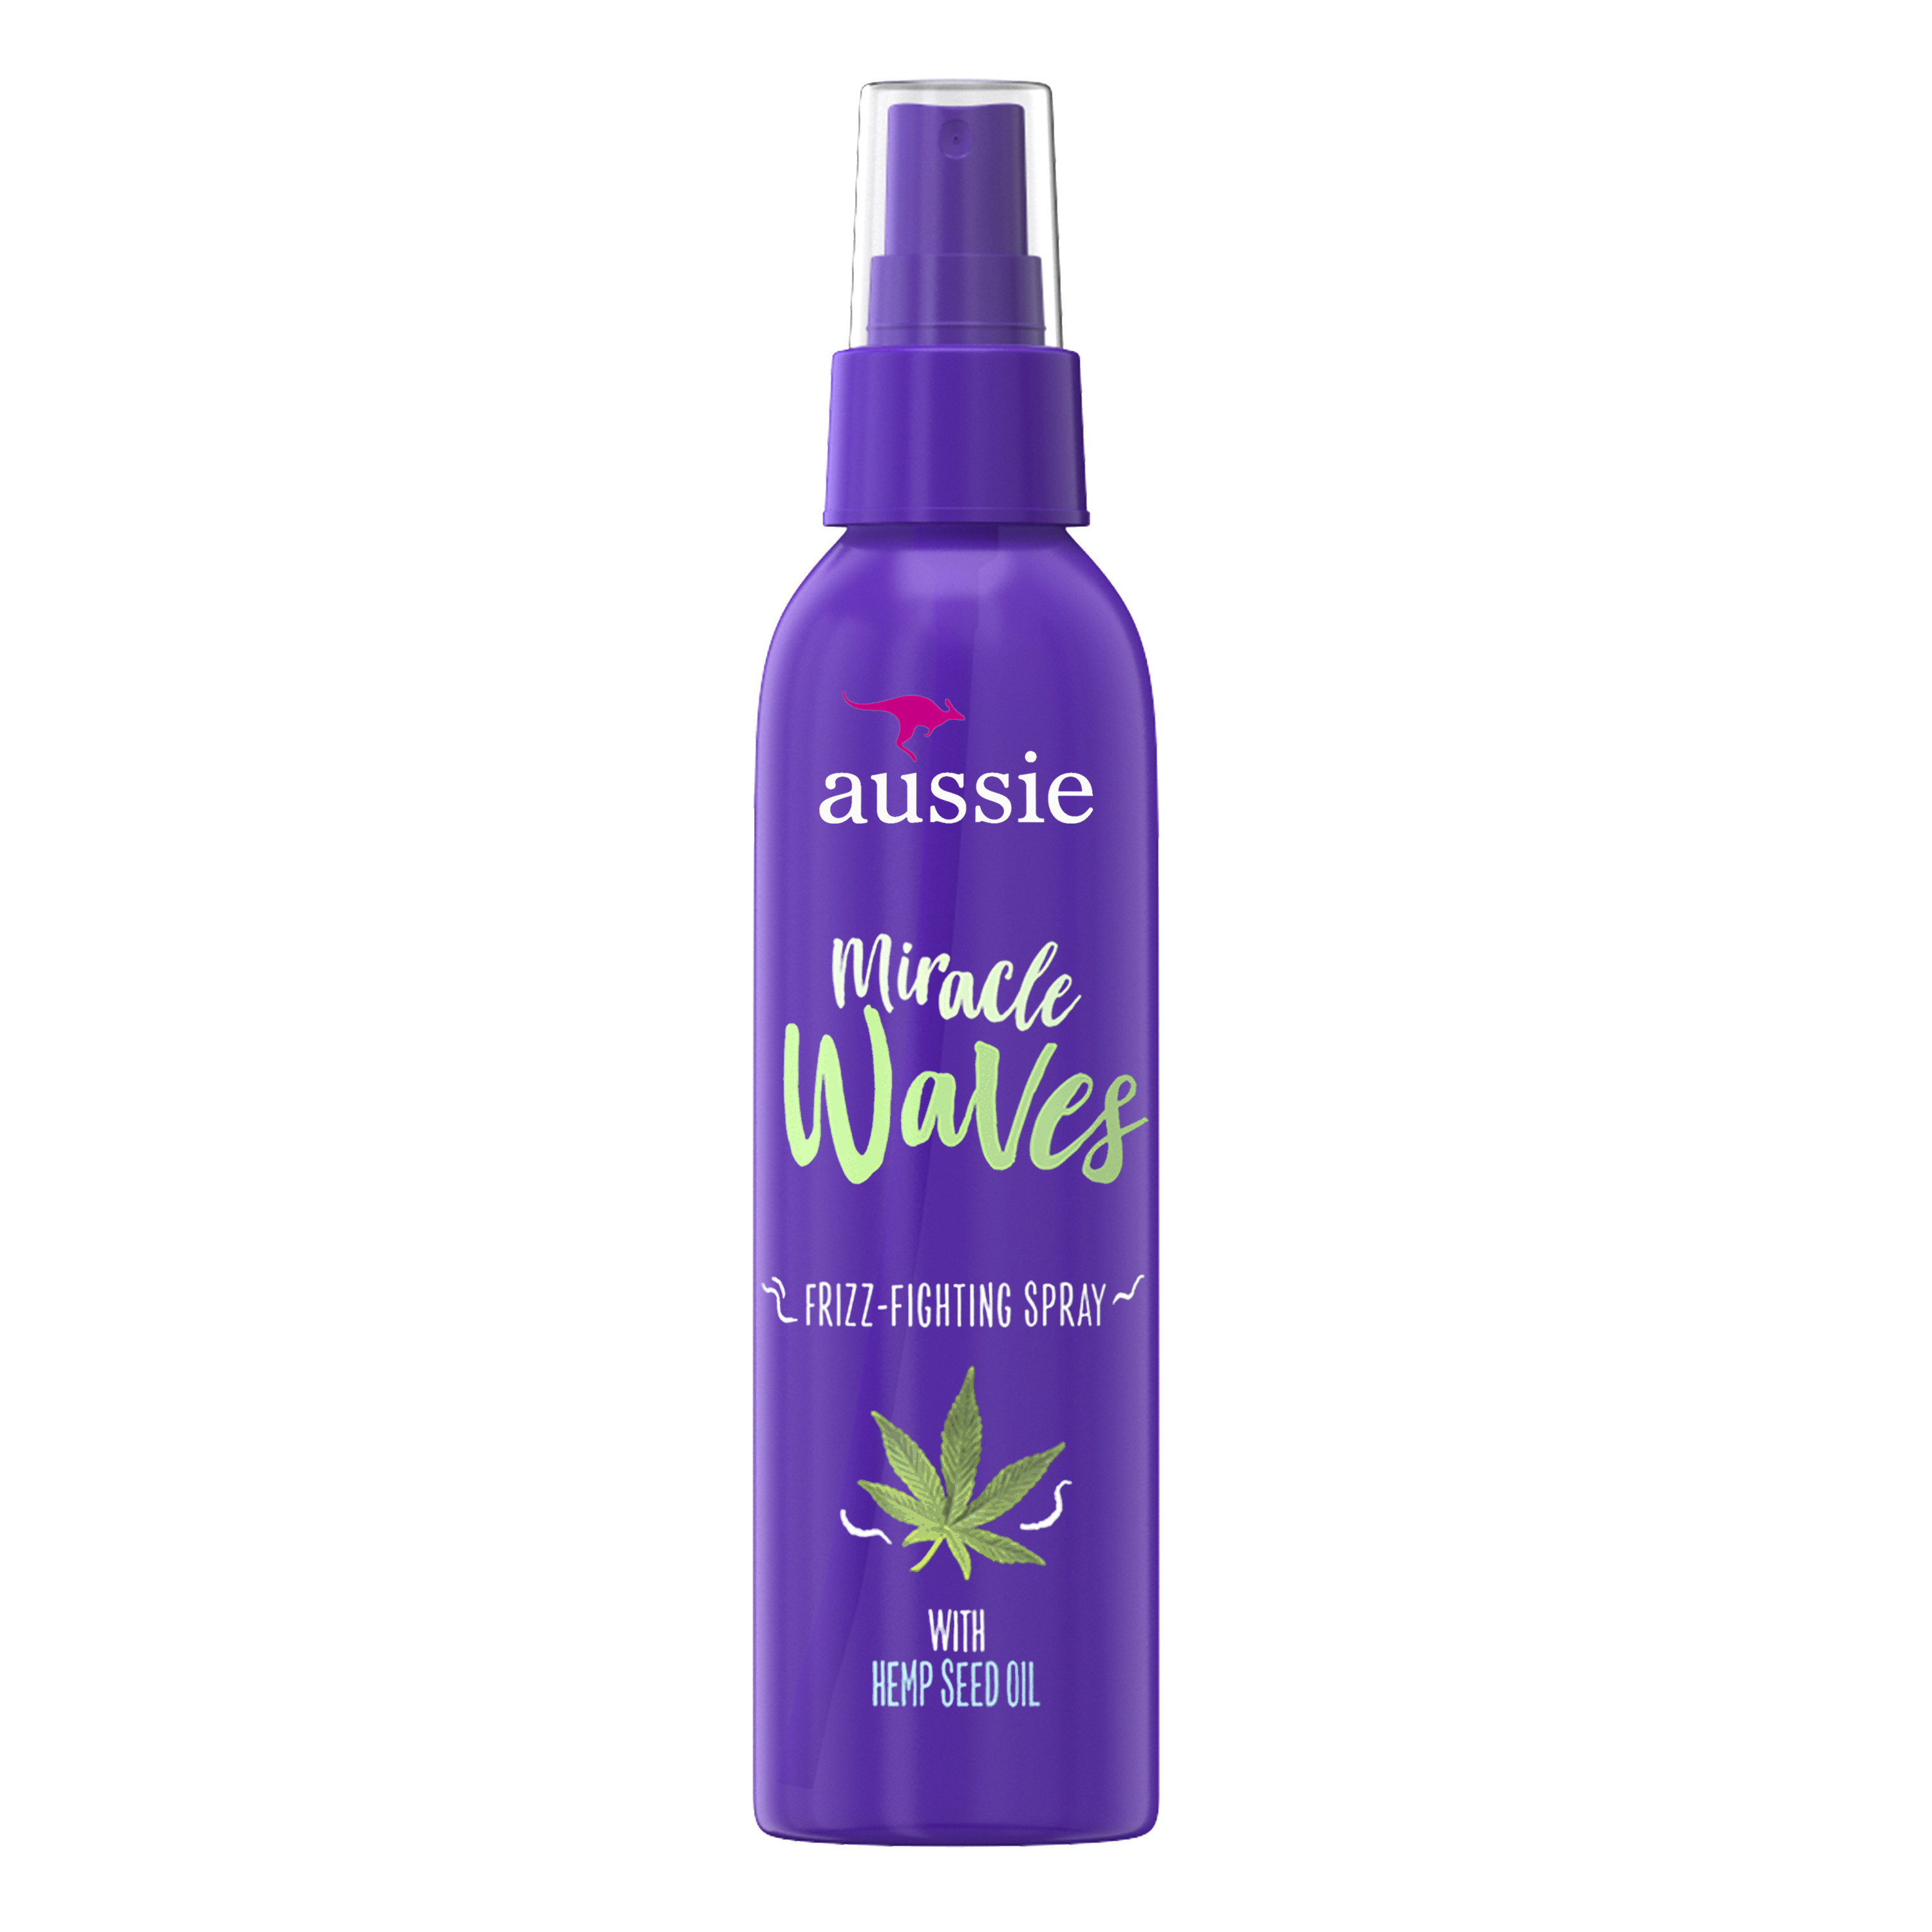 Aussie Miracle Waves Frizz-Fighting Spray with Hemp Seed Oil, Sulfate Free, 5.7 fl. oz. - image 1 of 9